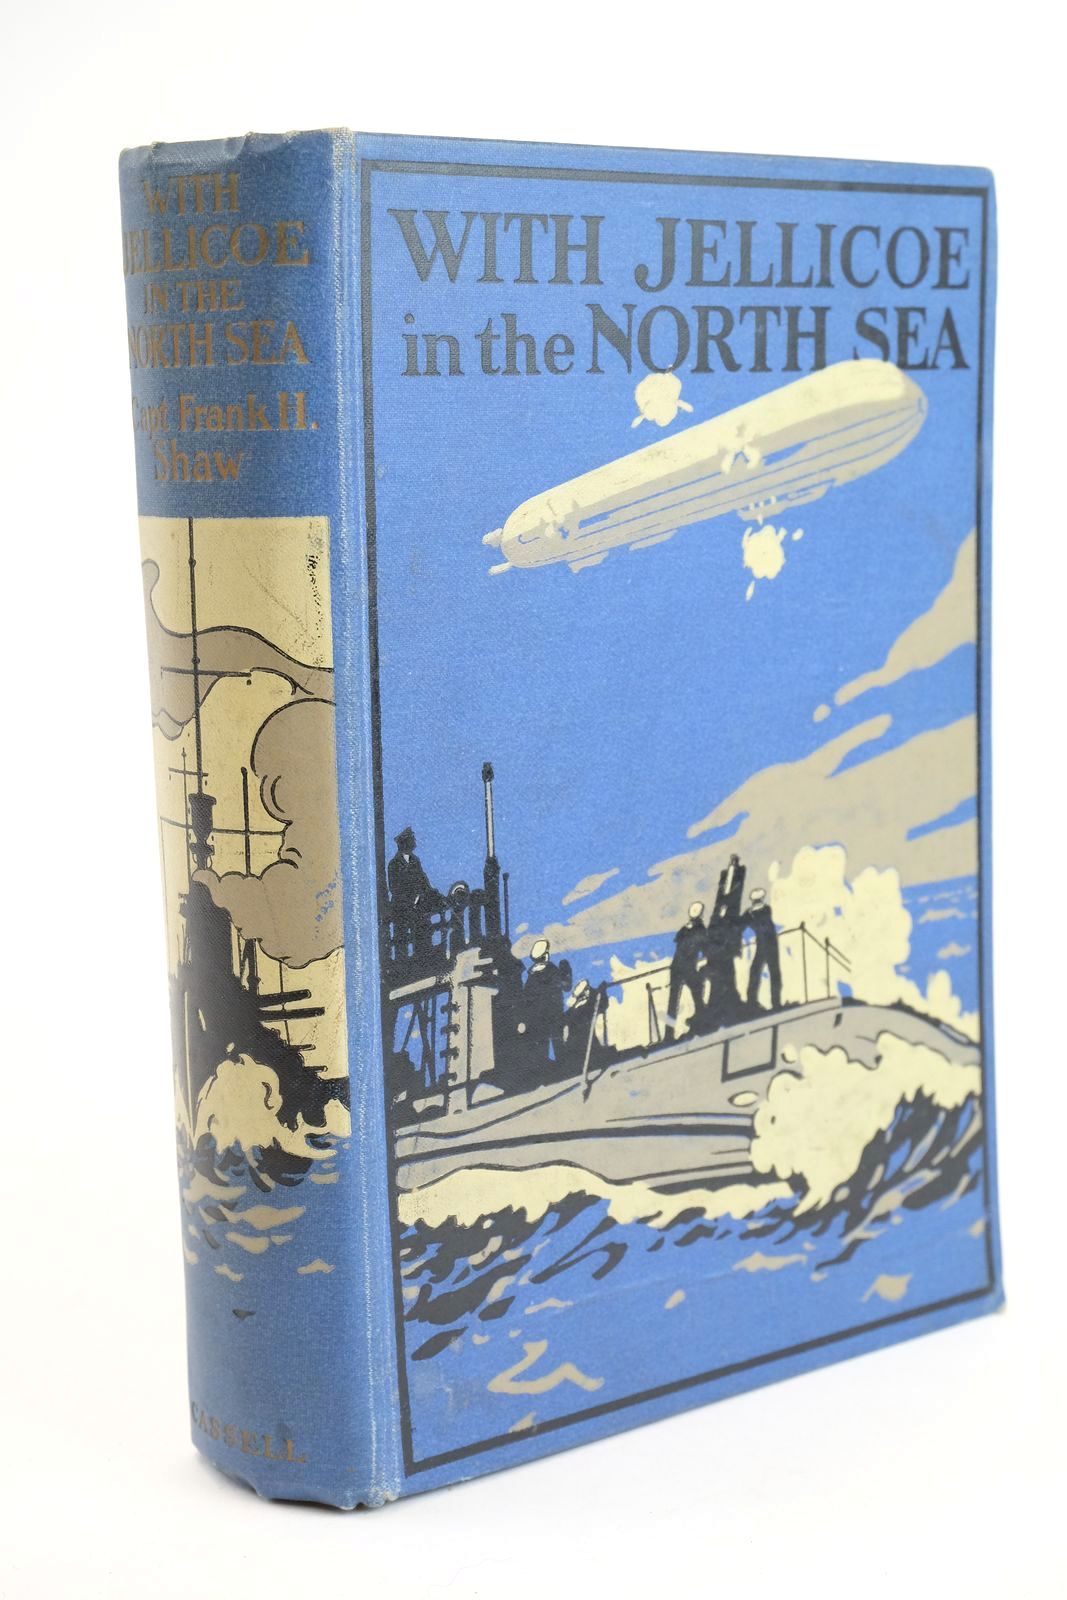 Photo of WITH JELLICOE IN THE NORTH SEA written by Shaw, Frank H. illustrated by Mason, J. published by Cassell &amp; Company Ltd (STOCK CODE: 1323813)  for sale by Stella & Rose's Books